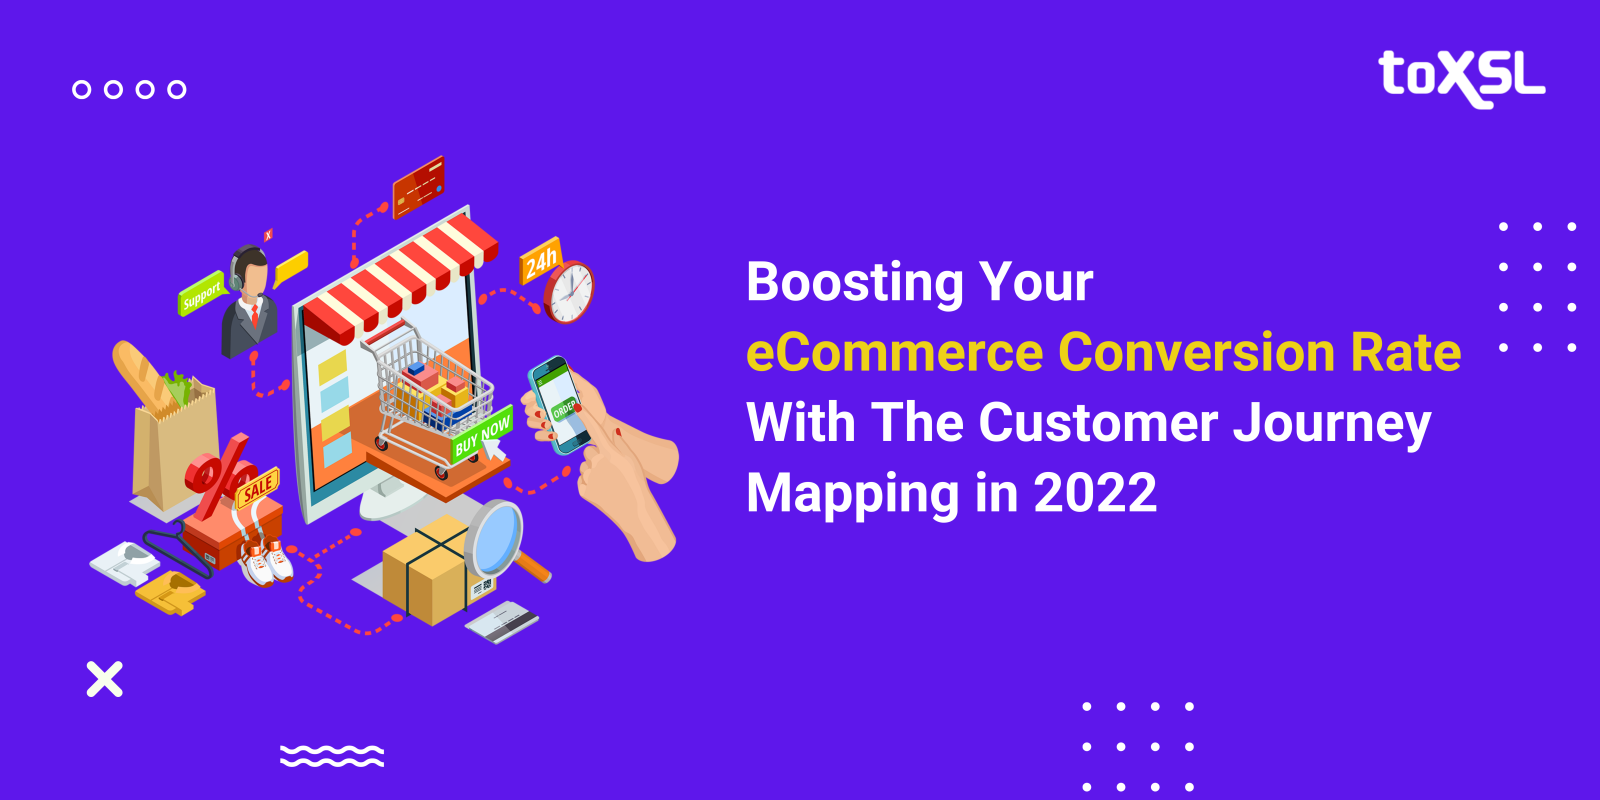 Boosting Your eCommerce Conversion Rate With The Customer Journey Mapping In 2022